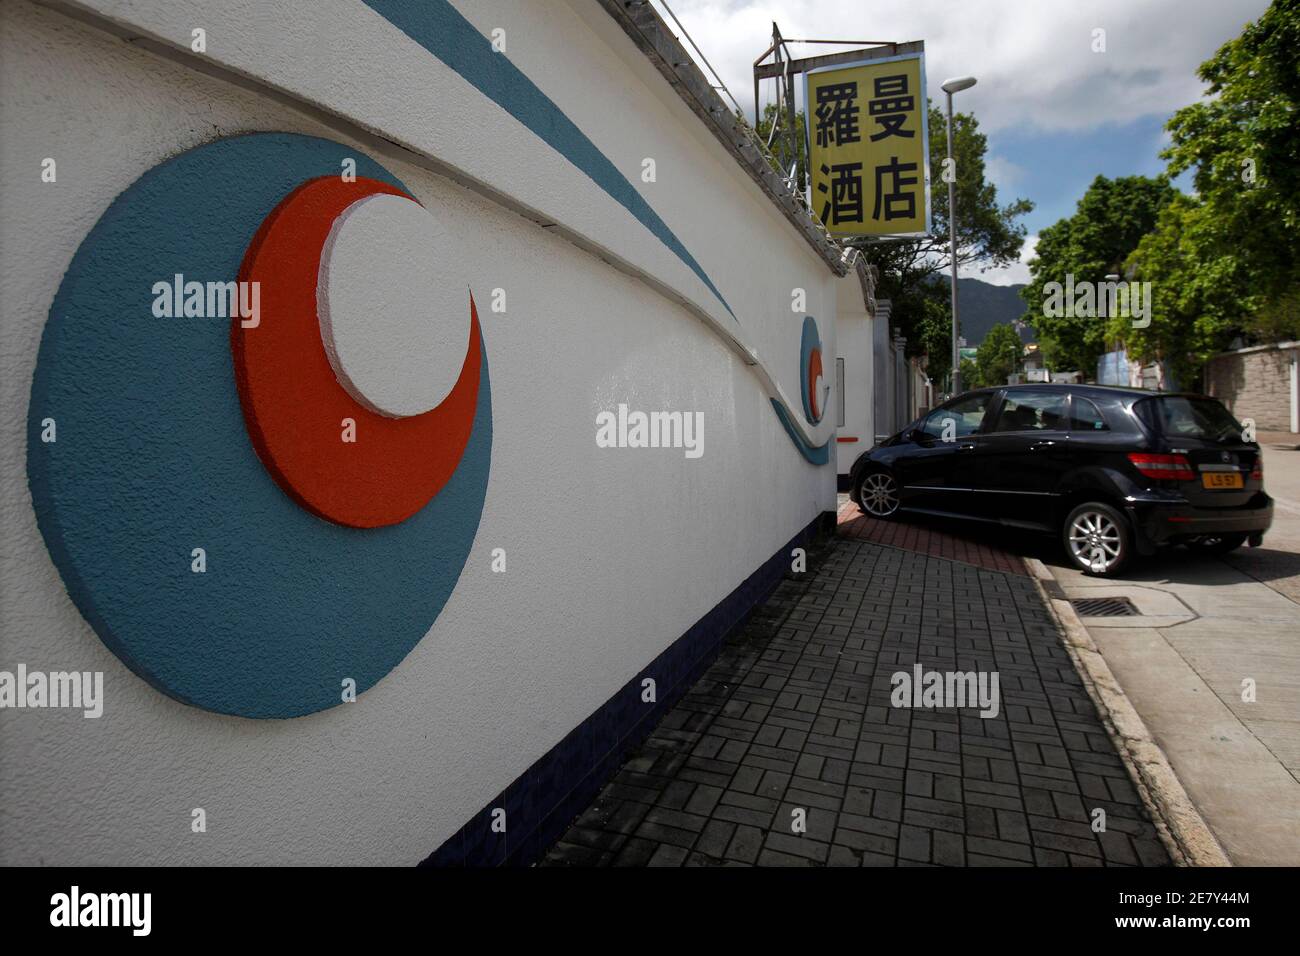 A car enters a motel, the former home of the late kung fu star Bruce Lee, in Hong Kong's Kowloon Tong district July 20, 2009. The billionaire owner of Lee's final home hopes to build a museum to the martial arts legend, giving in to public calls to prevent the sale of the luxury house in a northern Hong Kong suburb for millions of dollars. The Hong Kong government has launched a competition where the public has been invited to submit ideas and concepts for restoring the two storey house in Kowloon.   REUTERS/Tyrone Siu   (CHINA POLITICS ENTERTAINMENT) Stock Photo